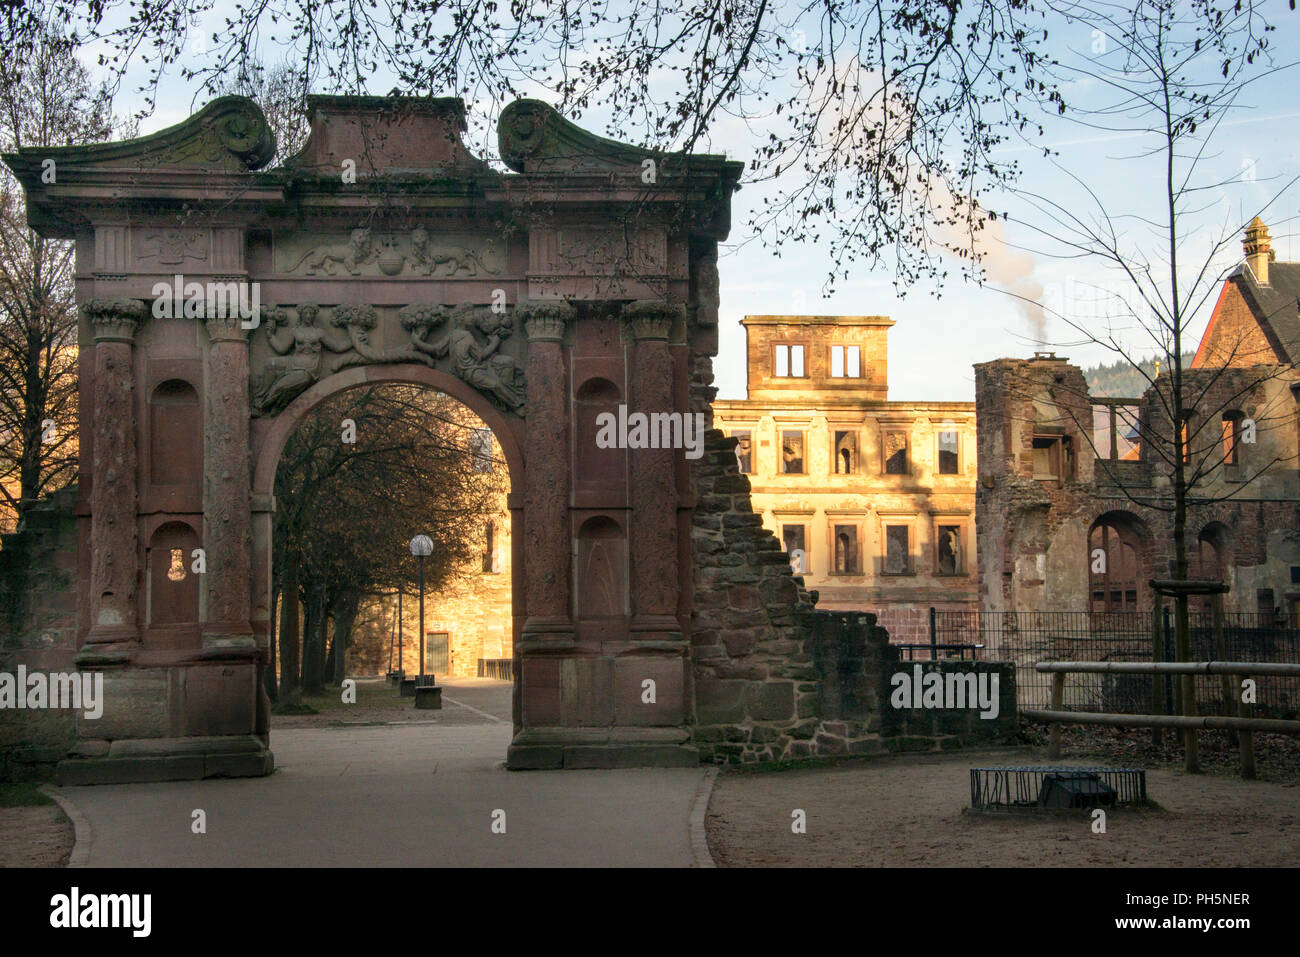 Heidelberg Castle arched gate among the ruins of this landmark Renaissance structure north of the Alps in Germany. Stock Photo